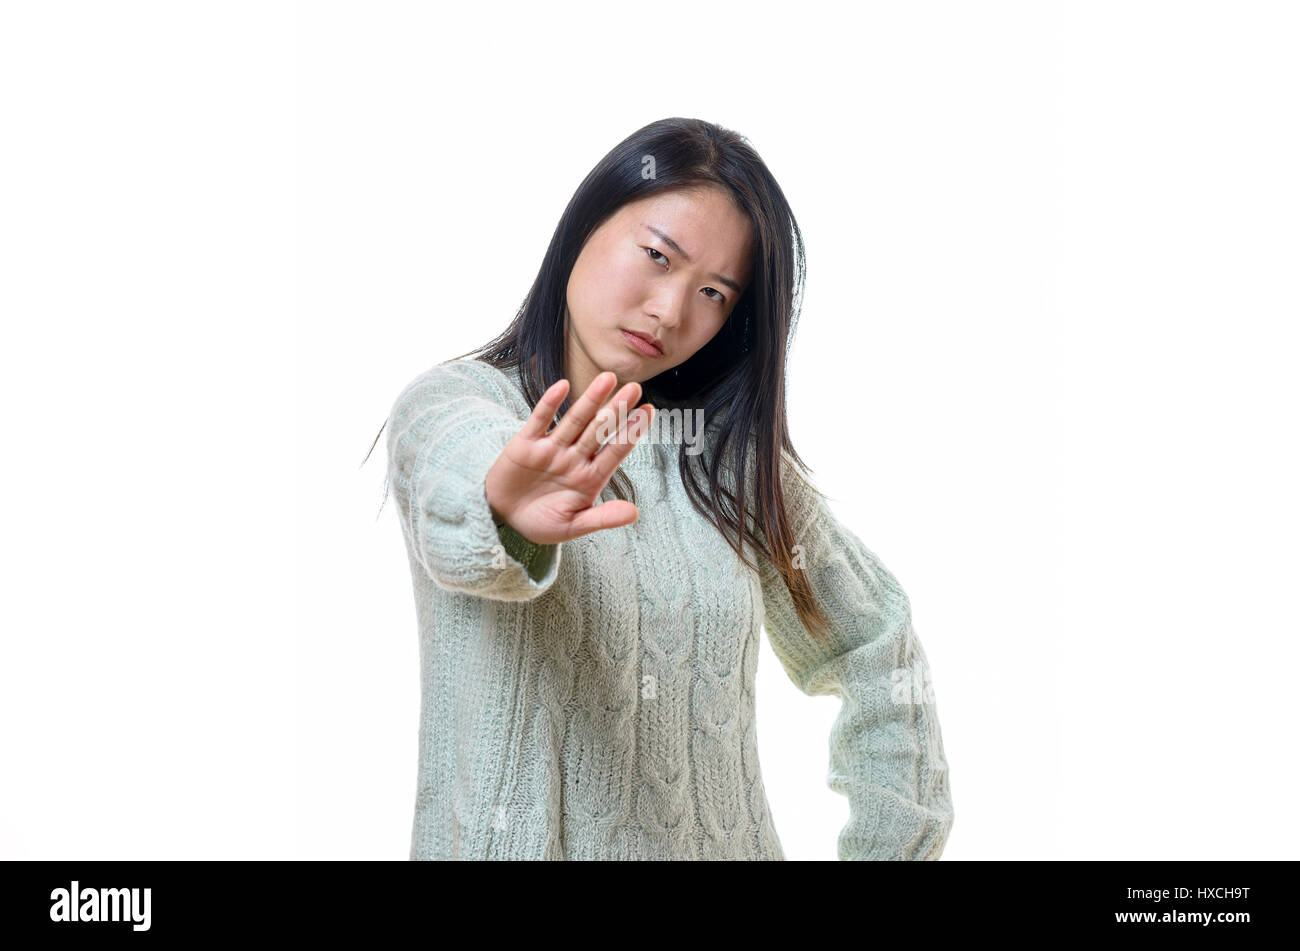 Angry stern young Chinese woman making a halt, enough or go away gesture with the palm of her hand, upper body isolated on white Stock Photo